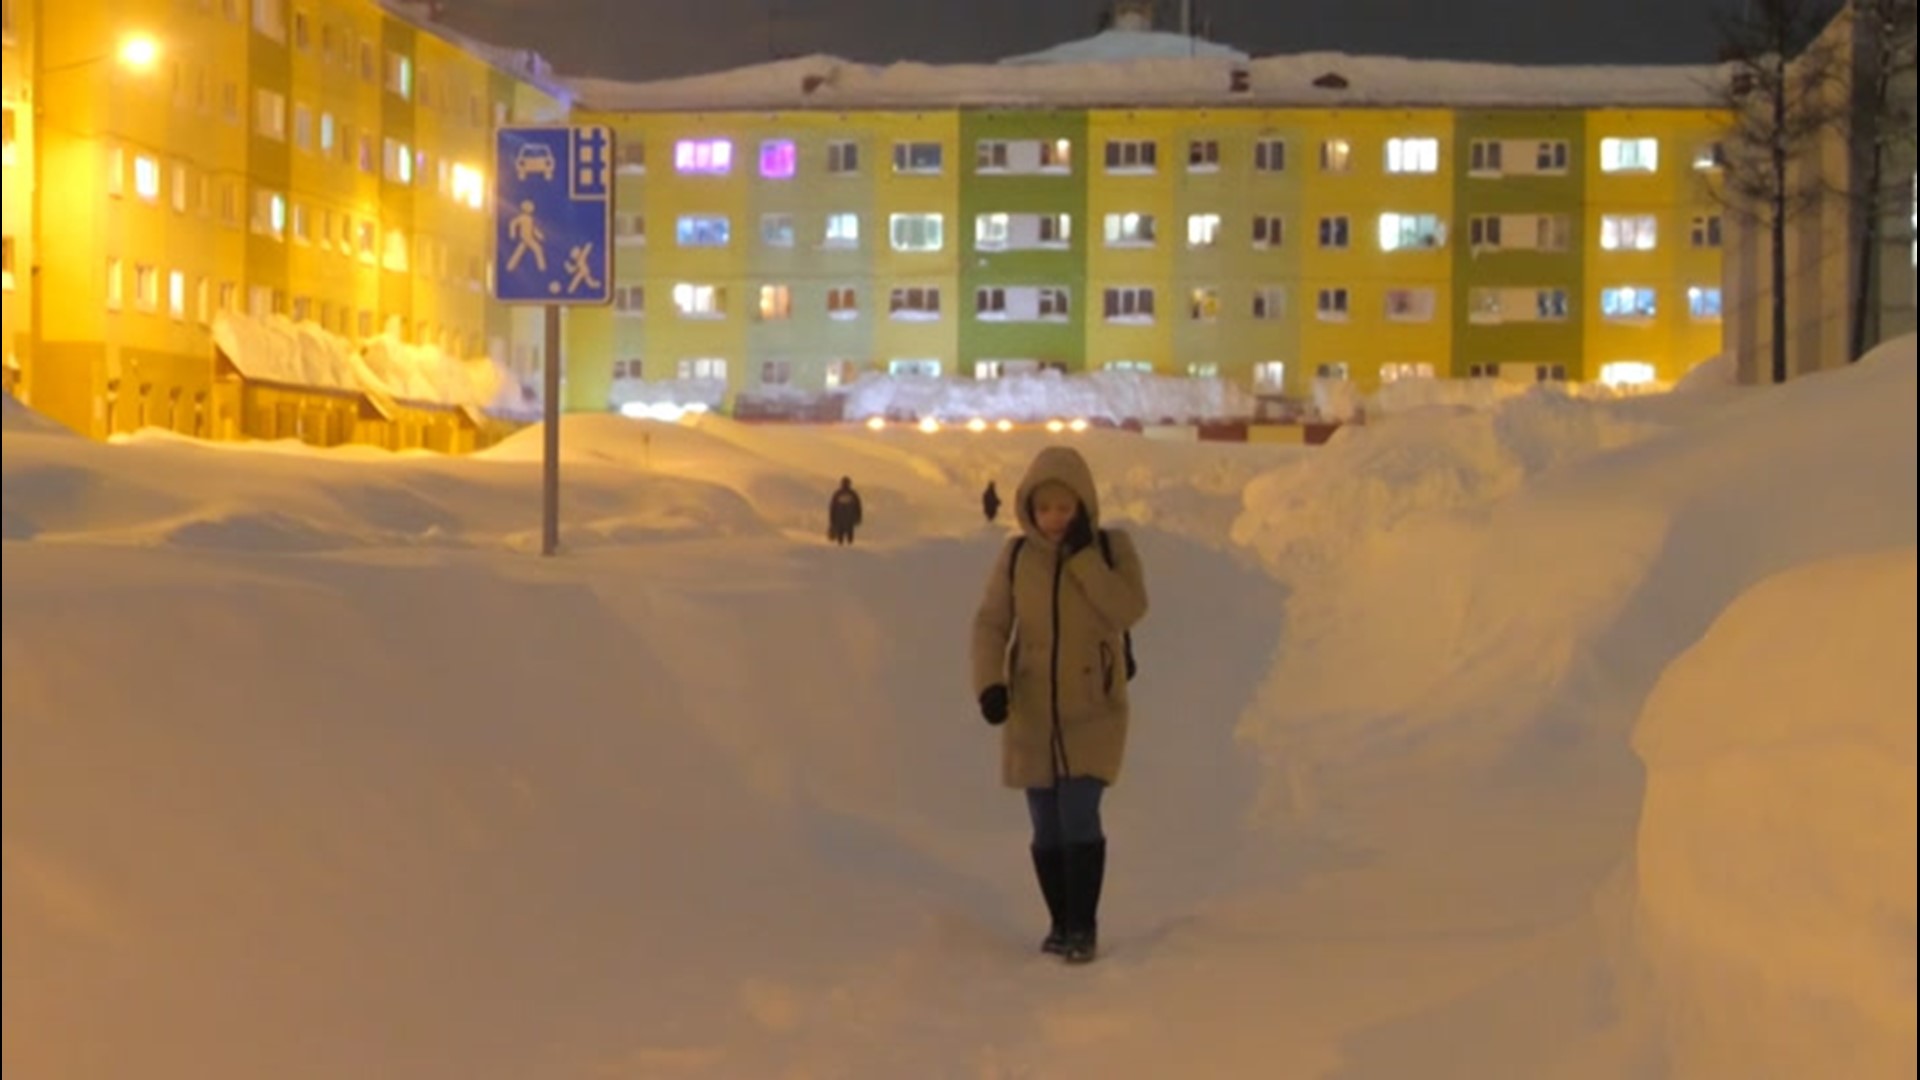 For more than a week, parts of northern Russia, including Norilsk, have been buried under snow that is waist-deep in some spots.